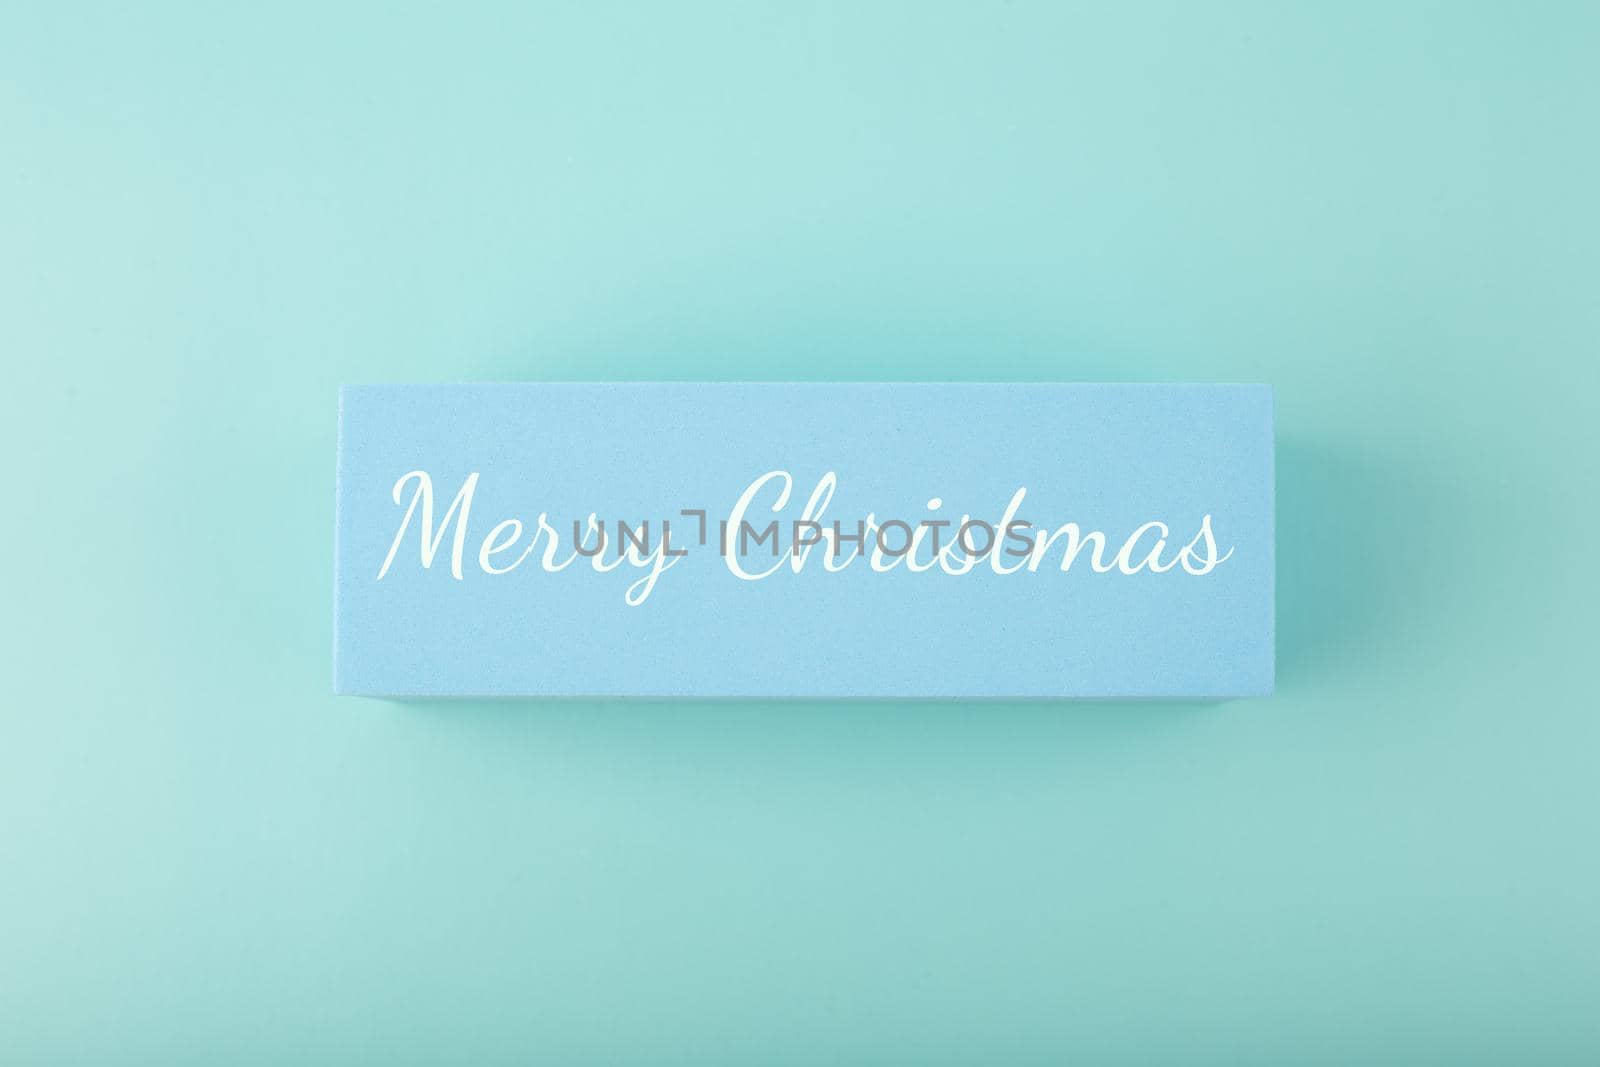 Merry Christmas minimal concept in light pastel blue colors. Handwritten text Merry Christmas on blue tablet against blue background. 